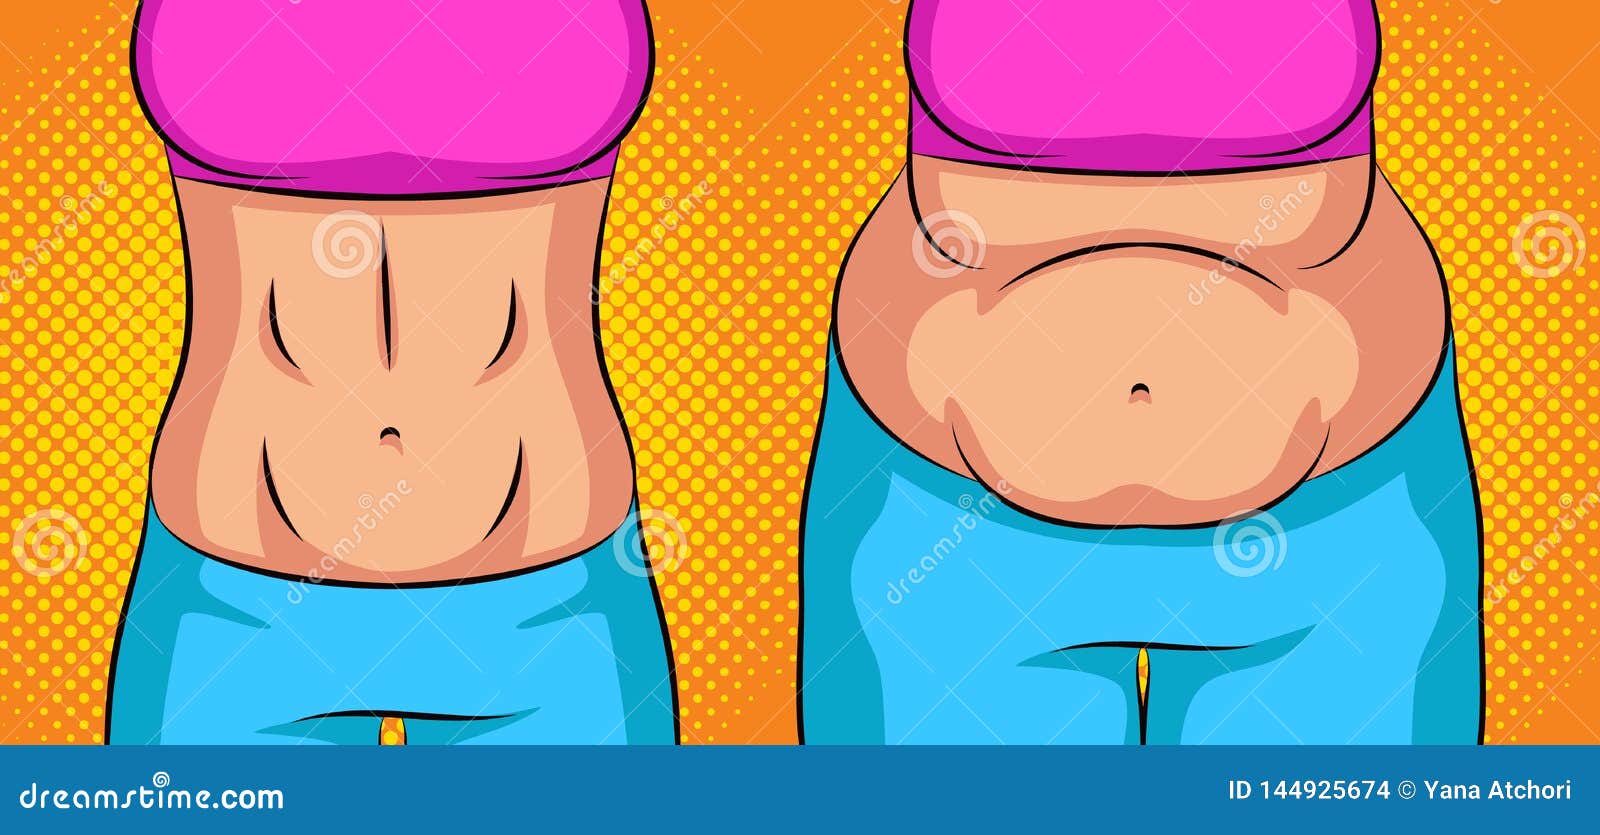 Color Pop Art Style Illustration Girl before and after Weight Loss. Flat  Stomach Vs the Fat Belly Stock Illustration - Illustration of calories,  concept: 144925674